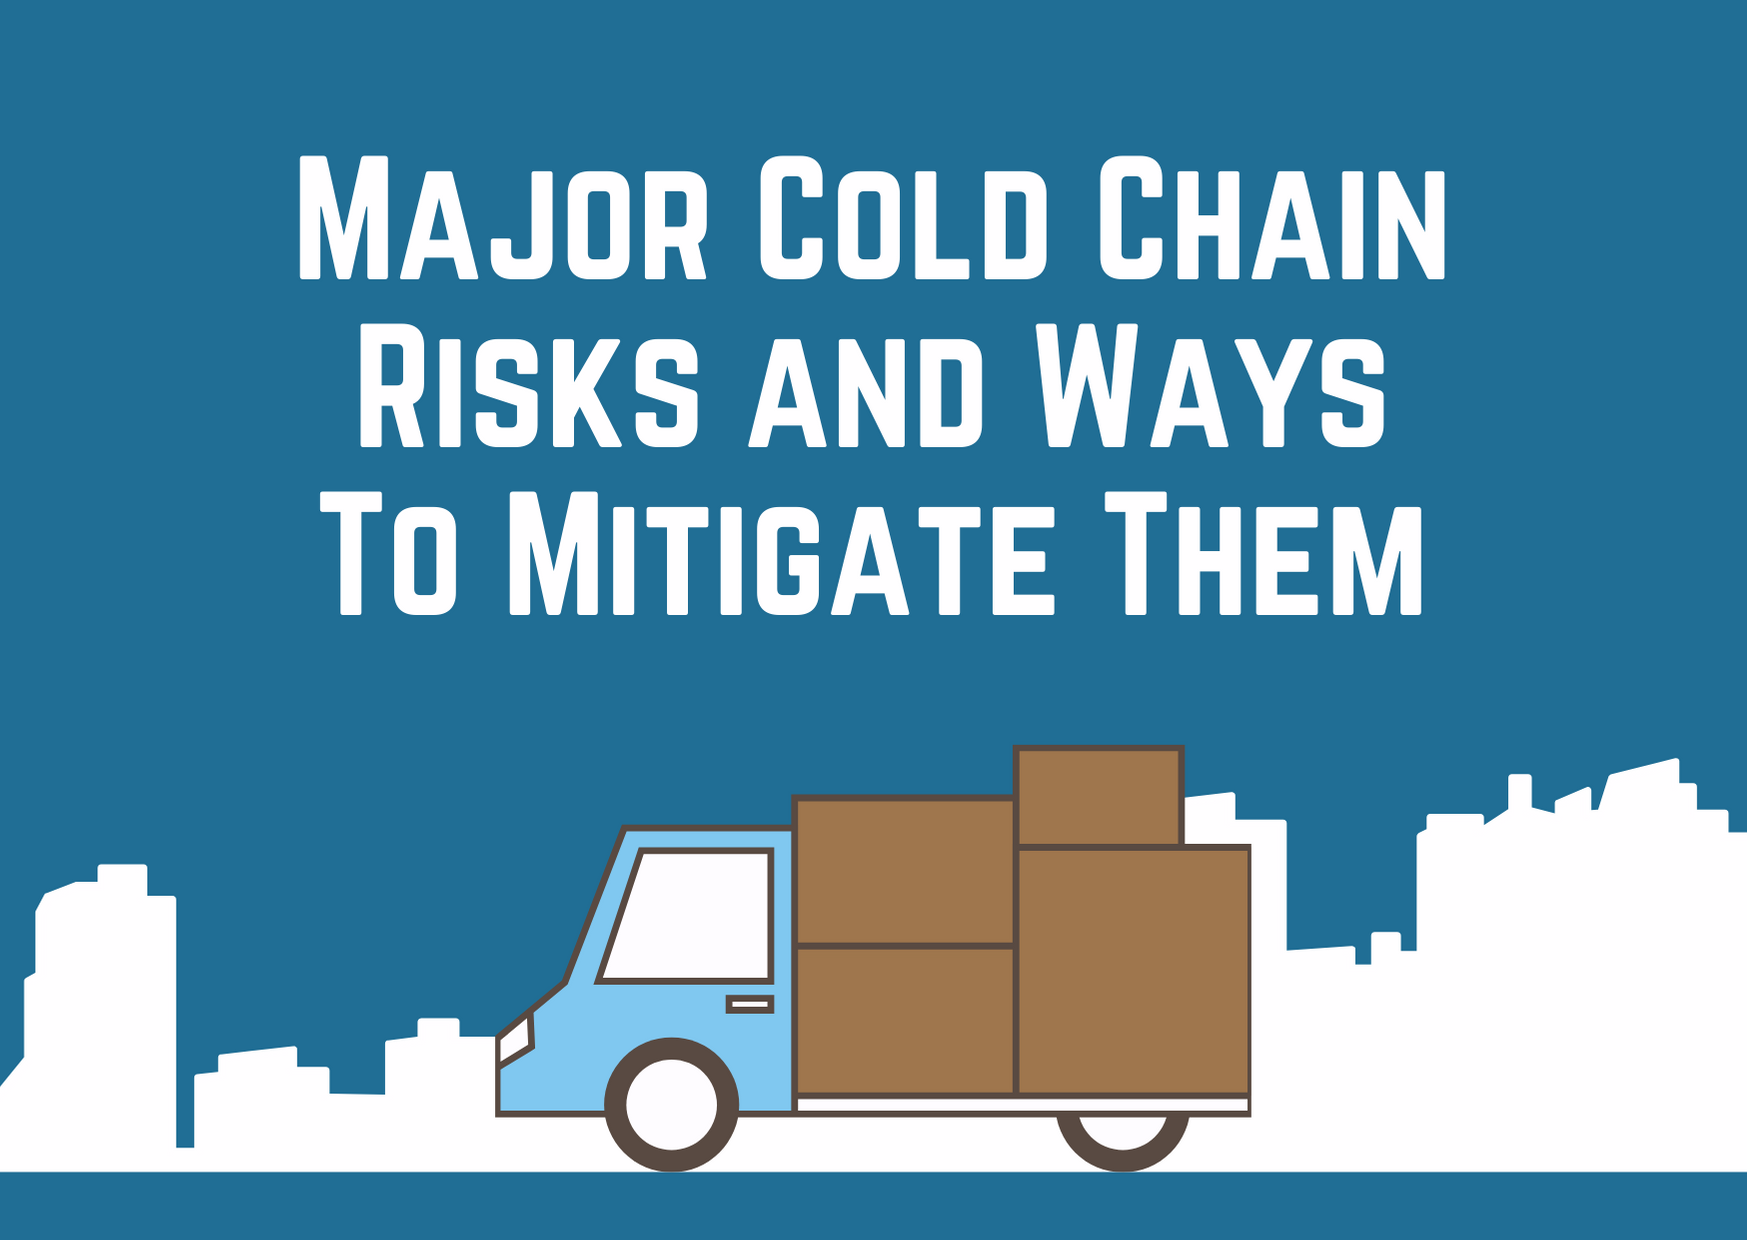 Cold Chain Risks and Ways to Mitigate them